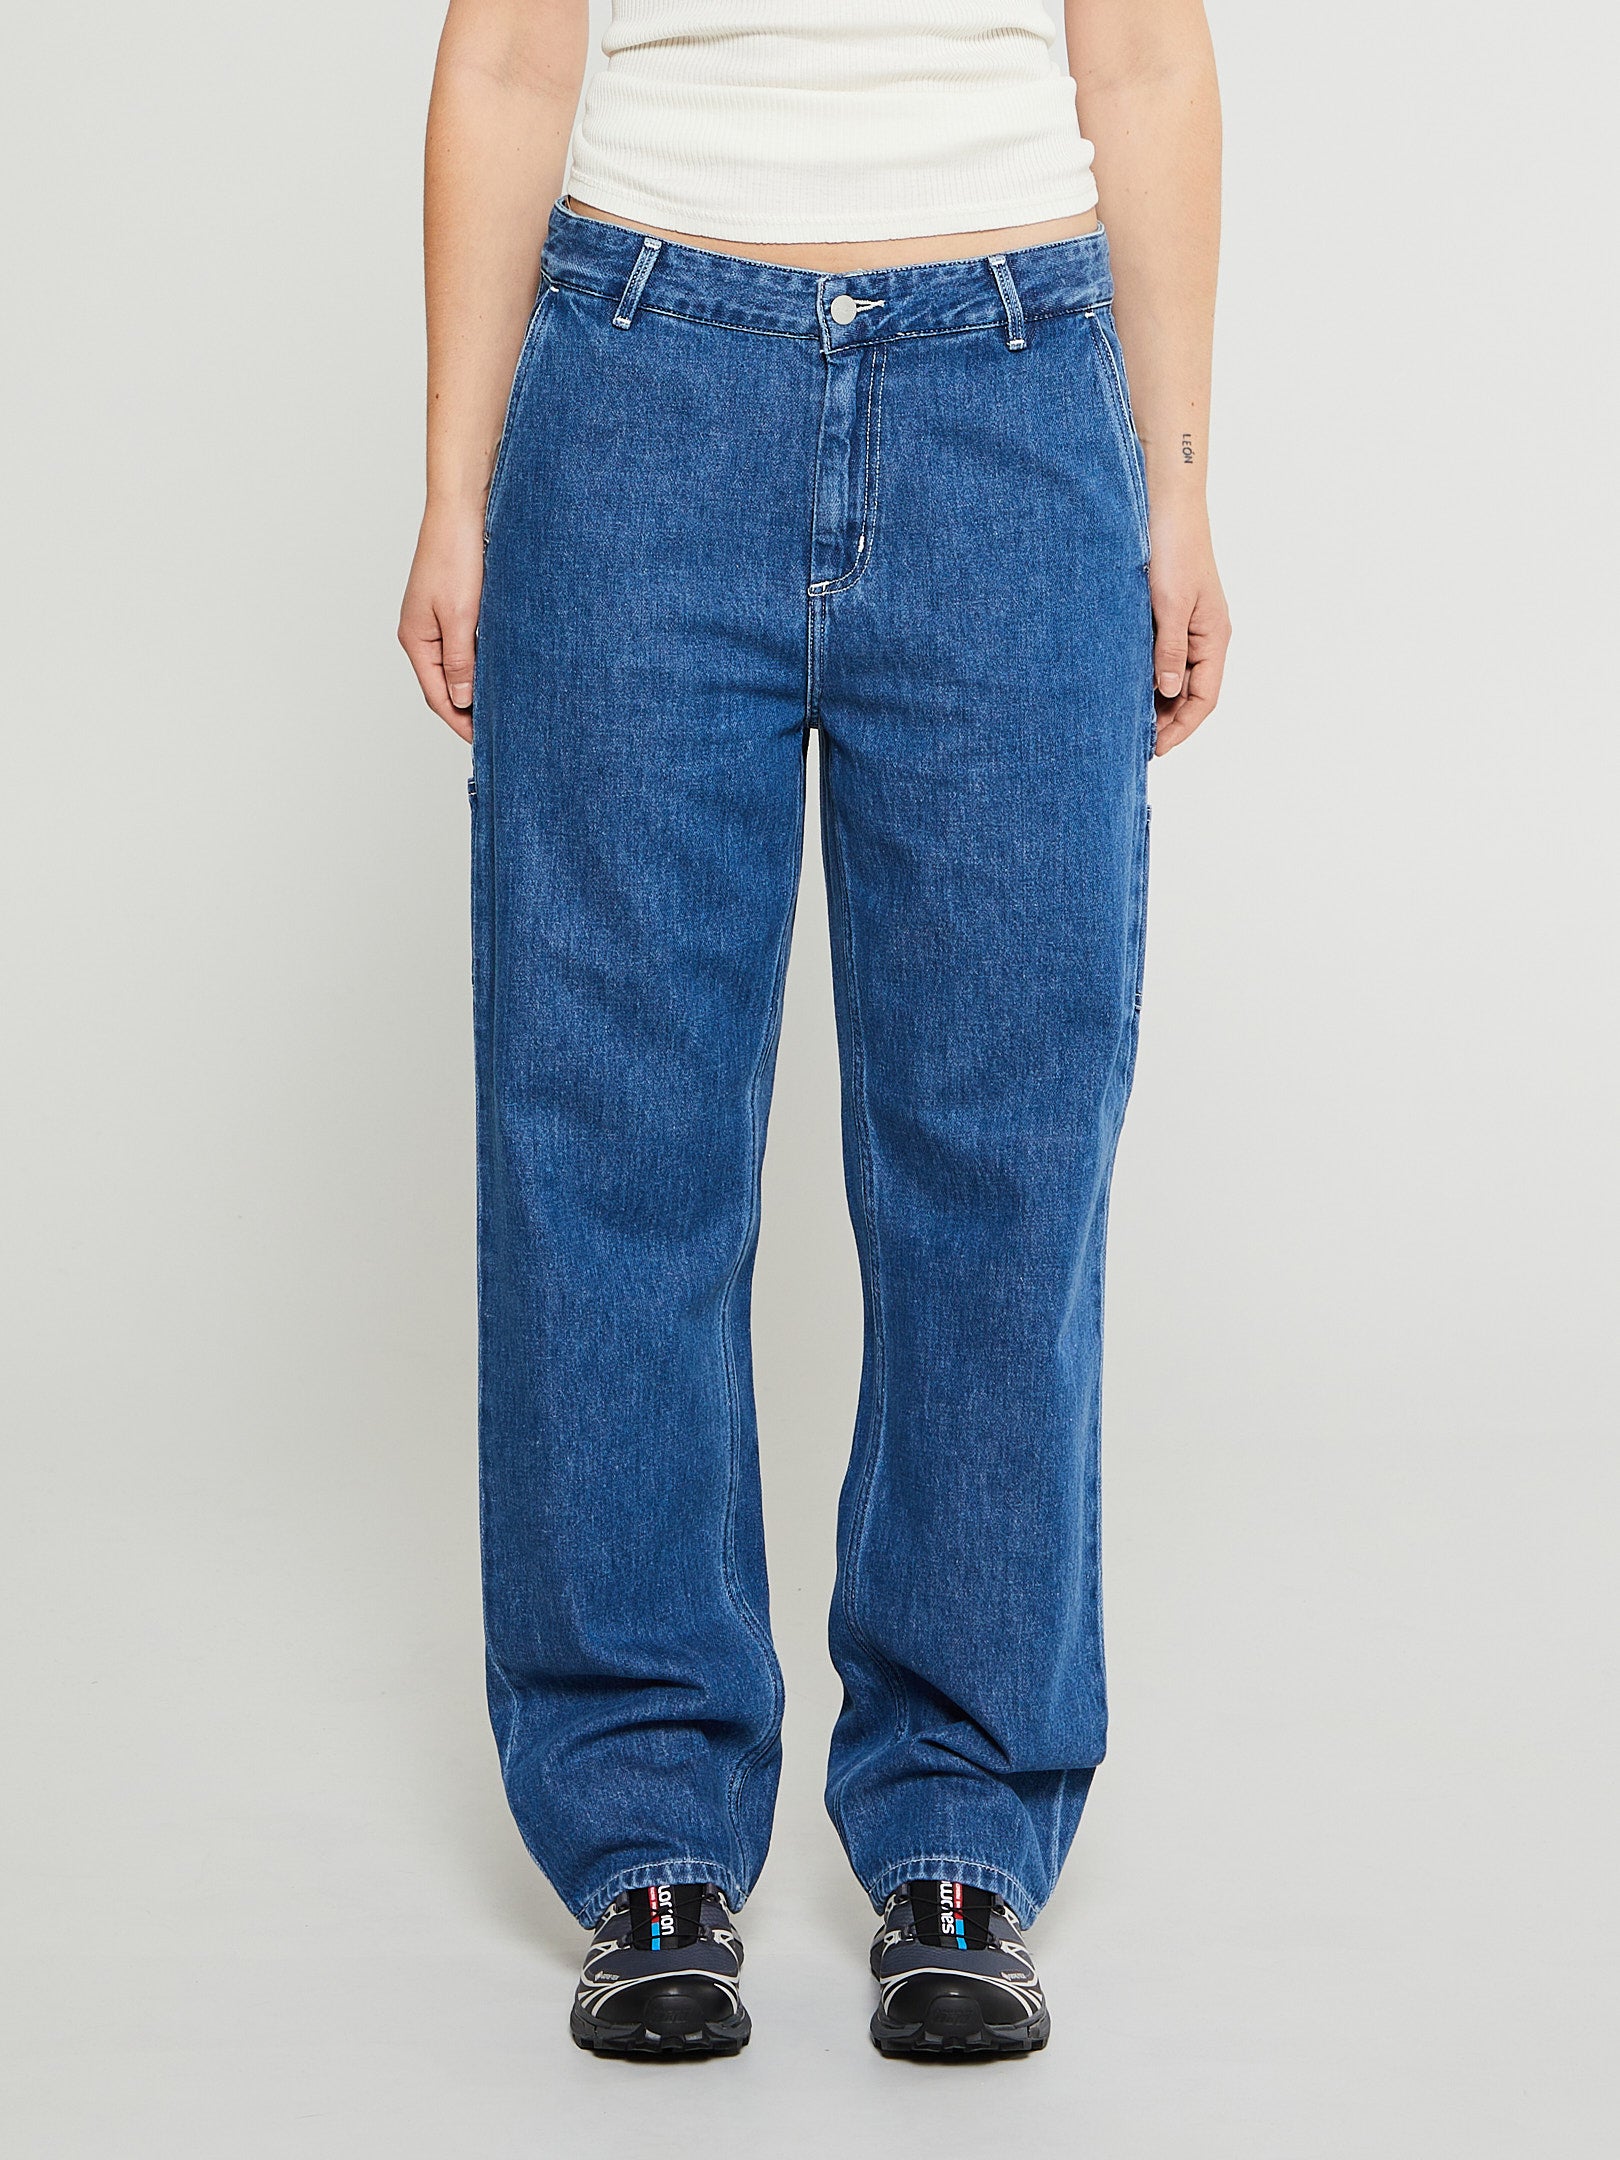 Carhartt WIP - W' Pierce Pant Straight in Blue Stone Washed – stoy